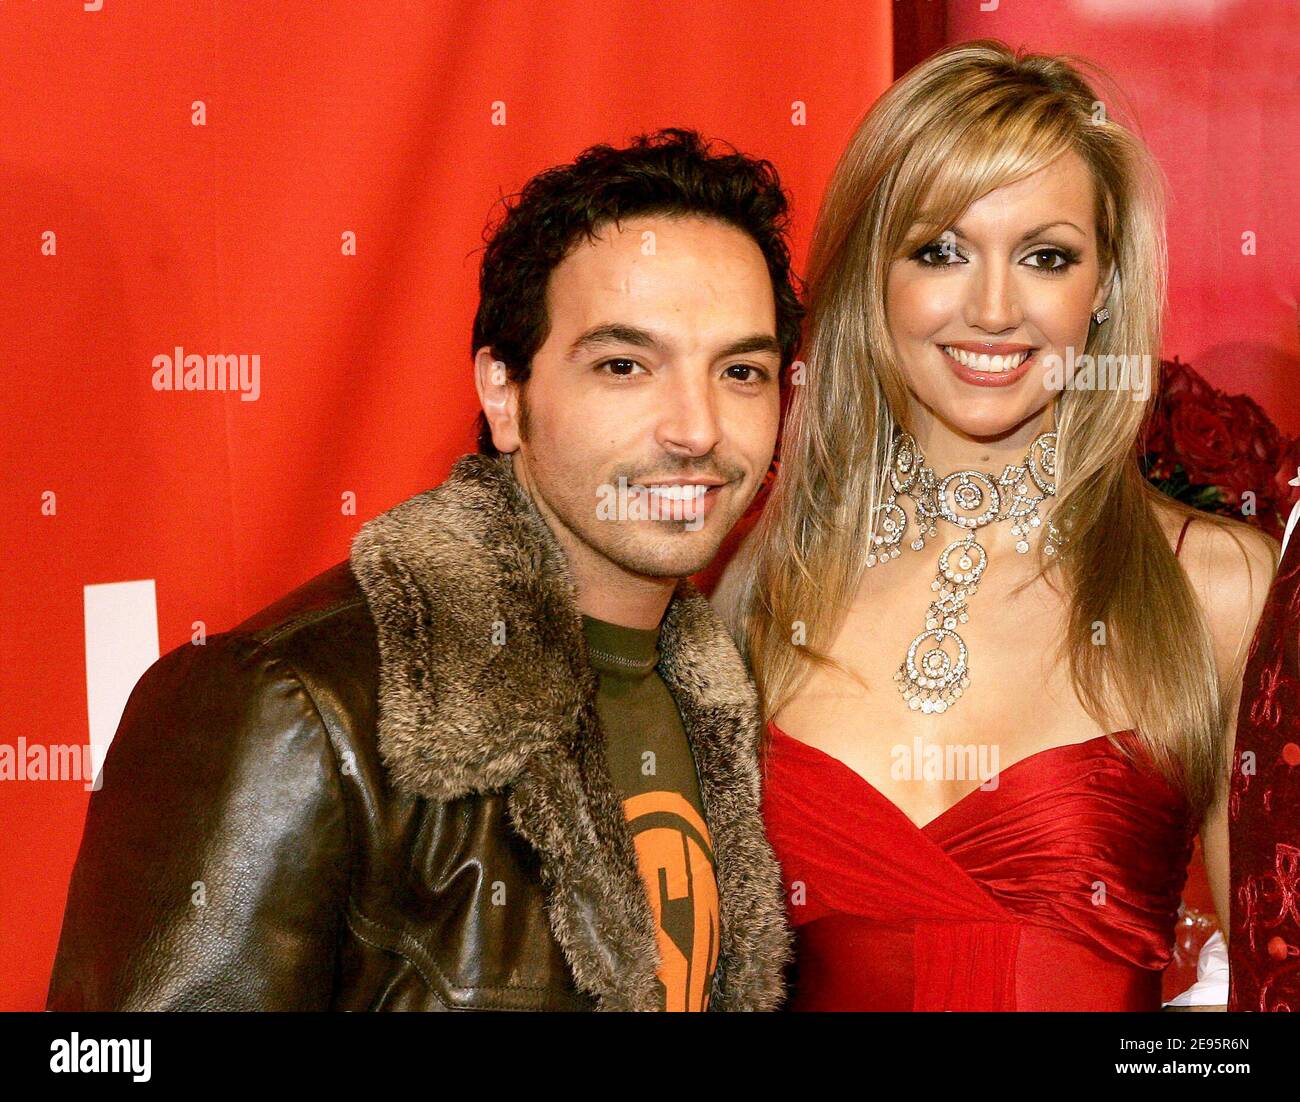 French choreographer Kamel Ouali and Miss World 2003 Rosanna Davison pose at the premiere of the Holiday on Ice show at 'Le Zenith' in Paris, France, on February 14, 2006. Photo by Laurent Zabulon/ABACAPRESS.COM. Stock Photo